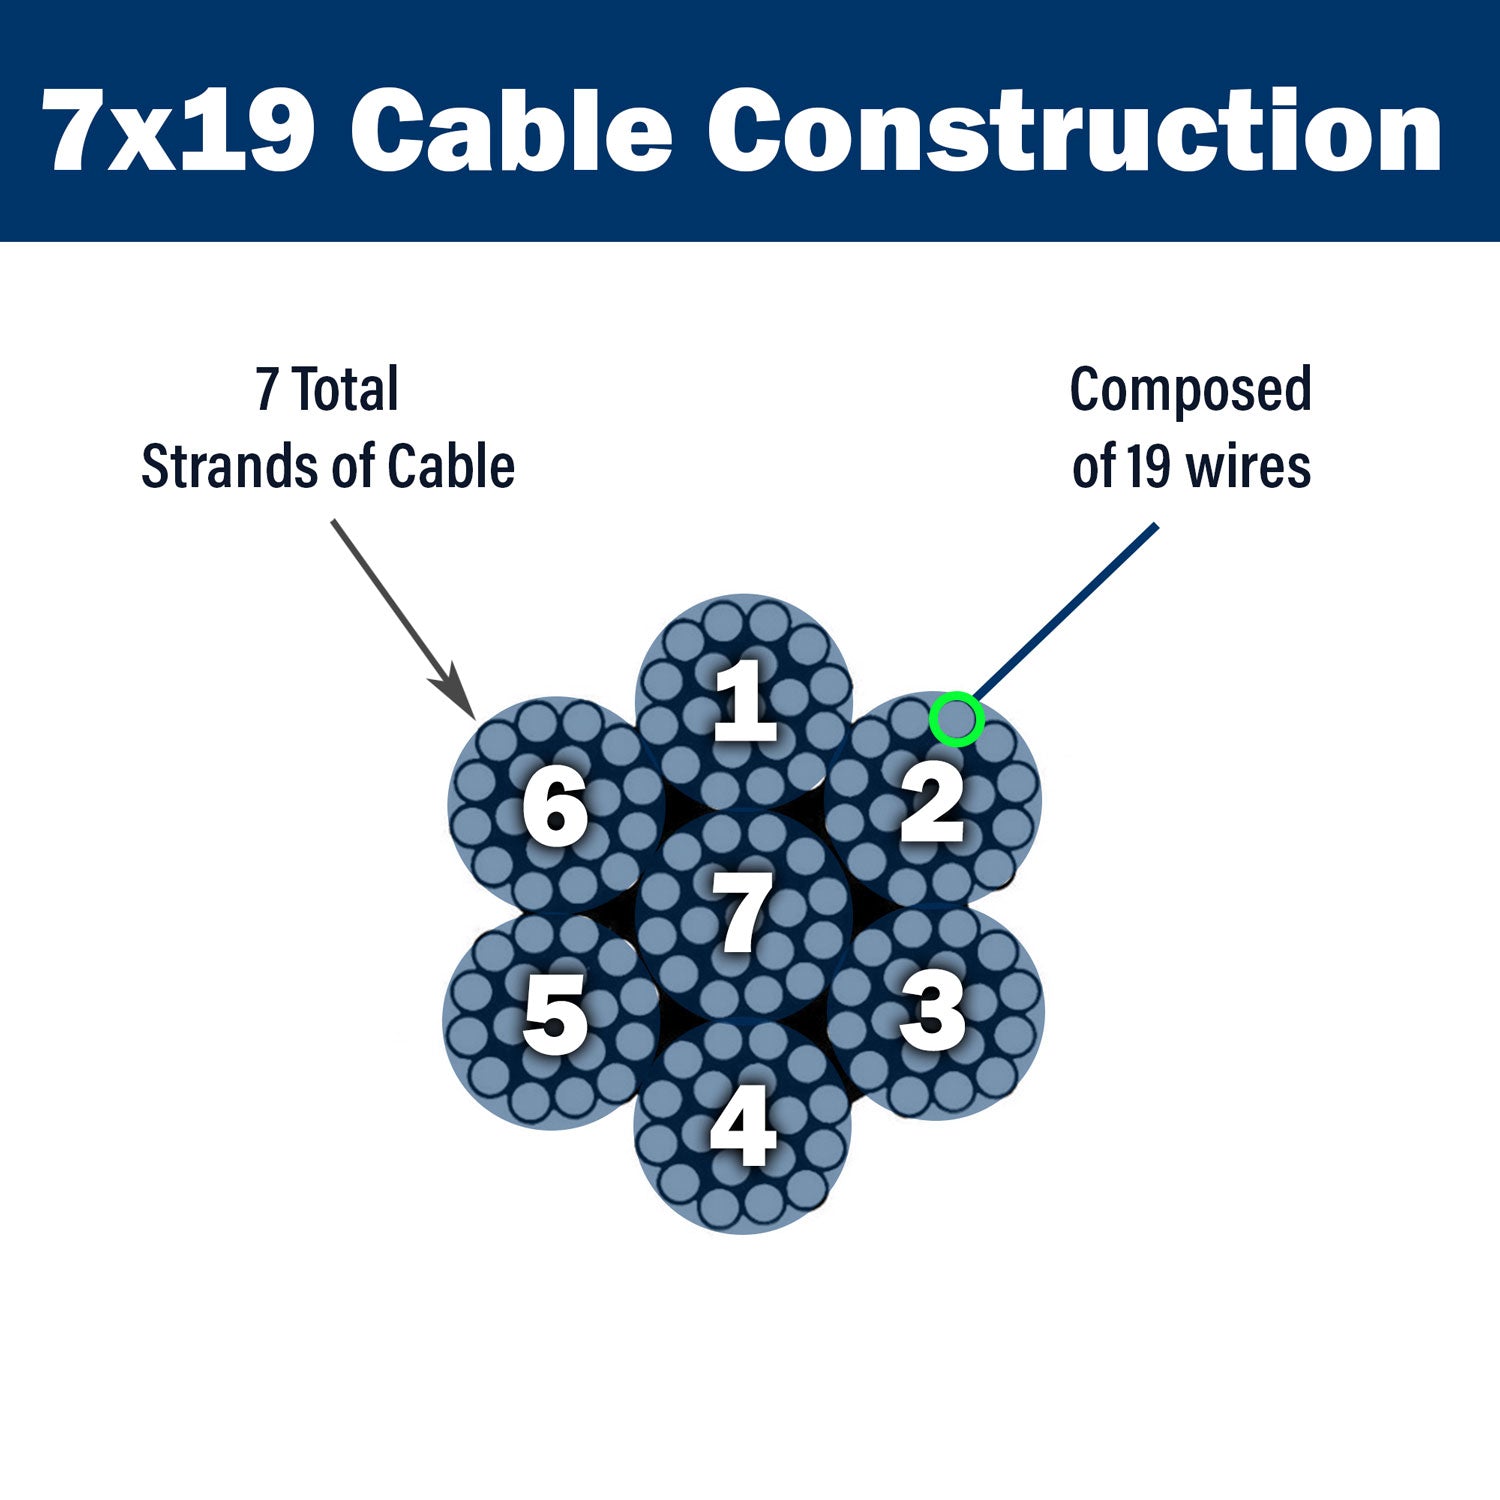 7x19 cable construction graphic